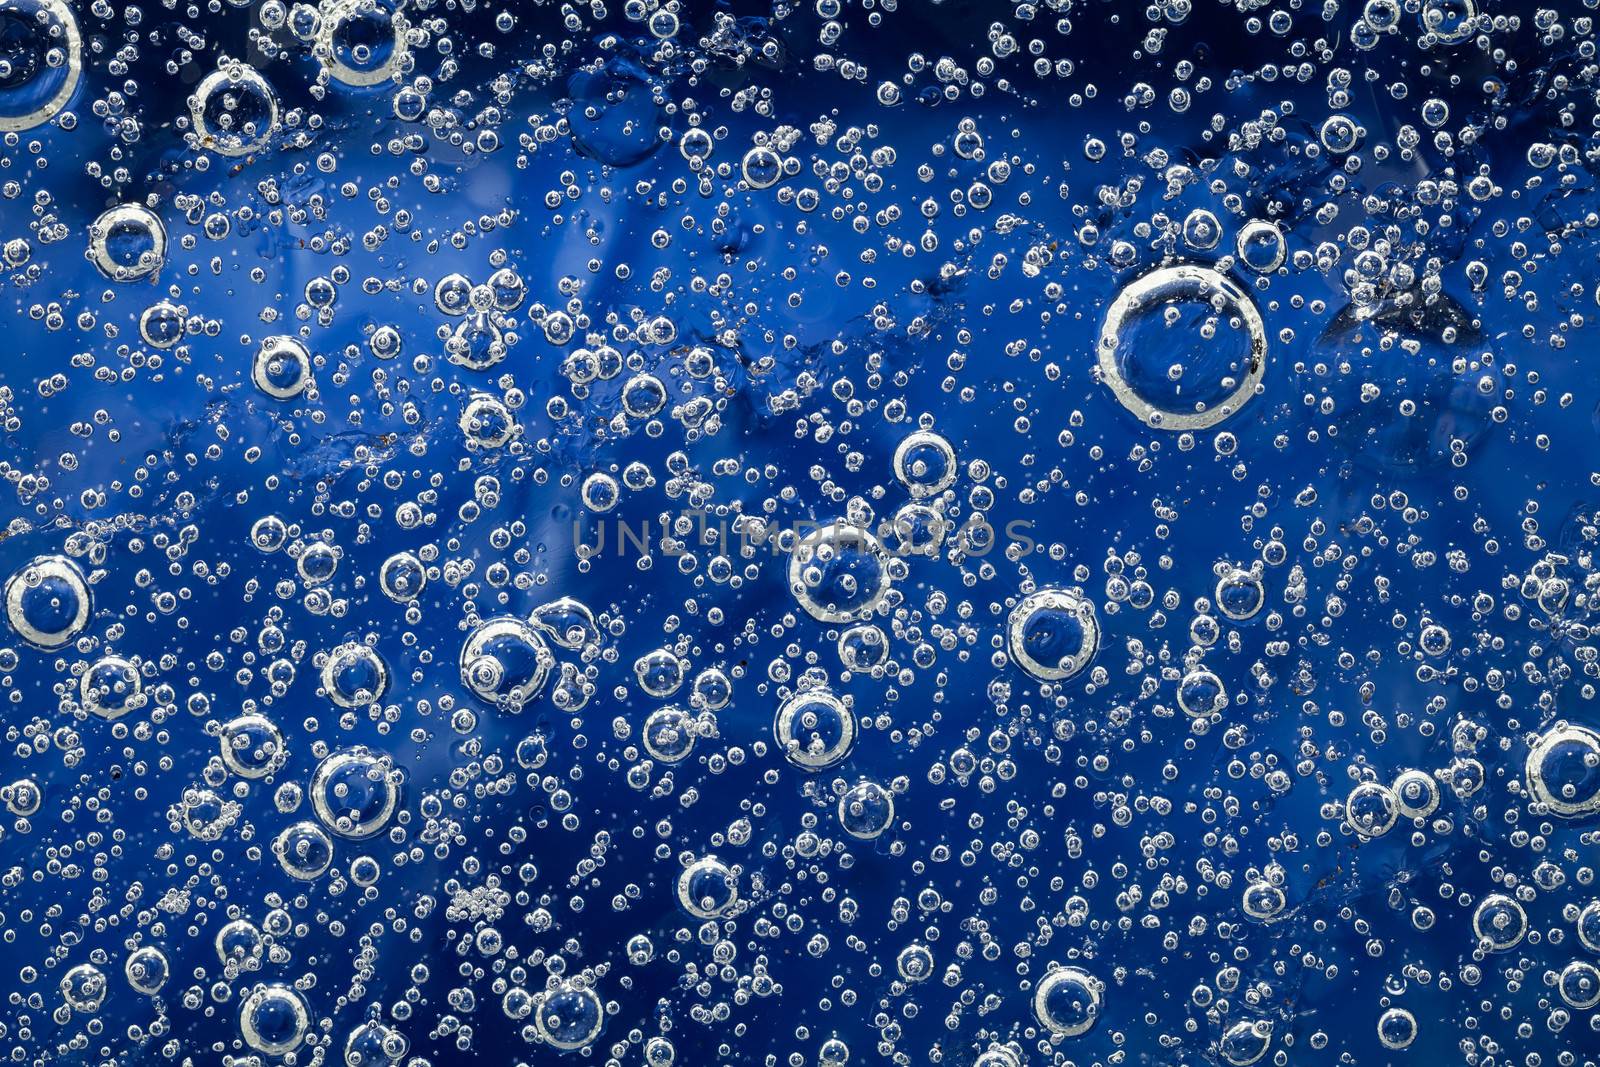 Ice background with bubbles. Natural blue texture of ice